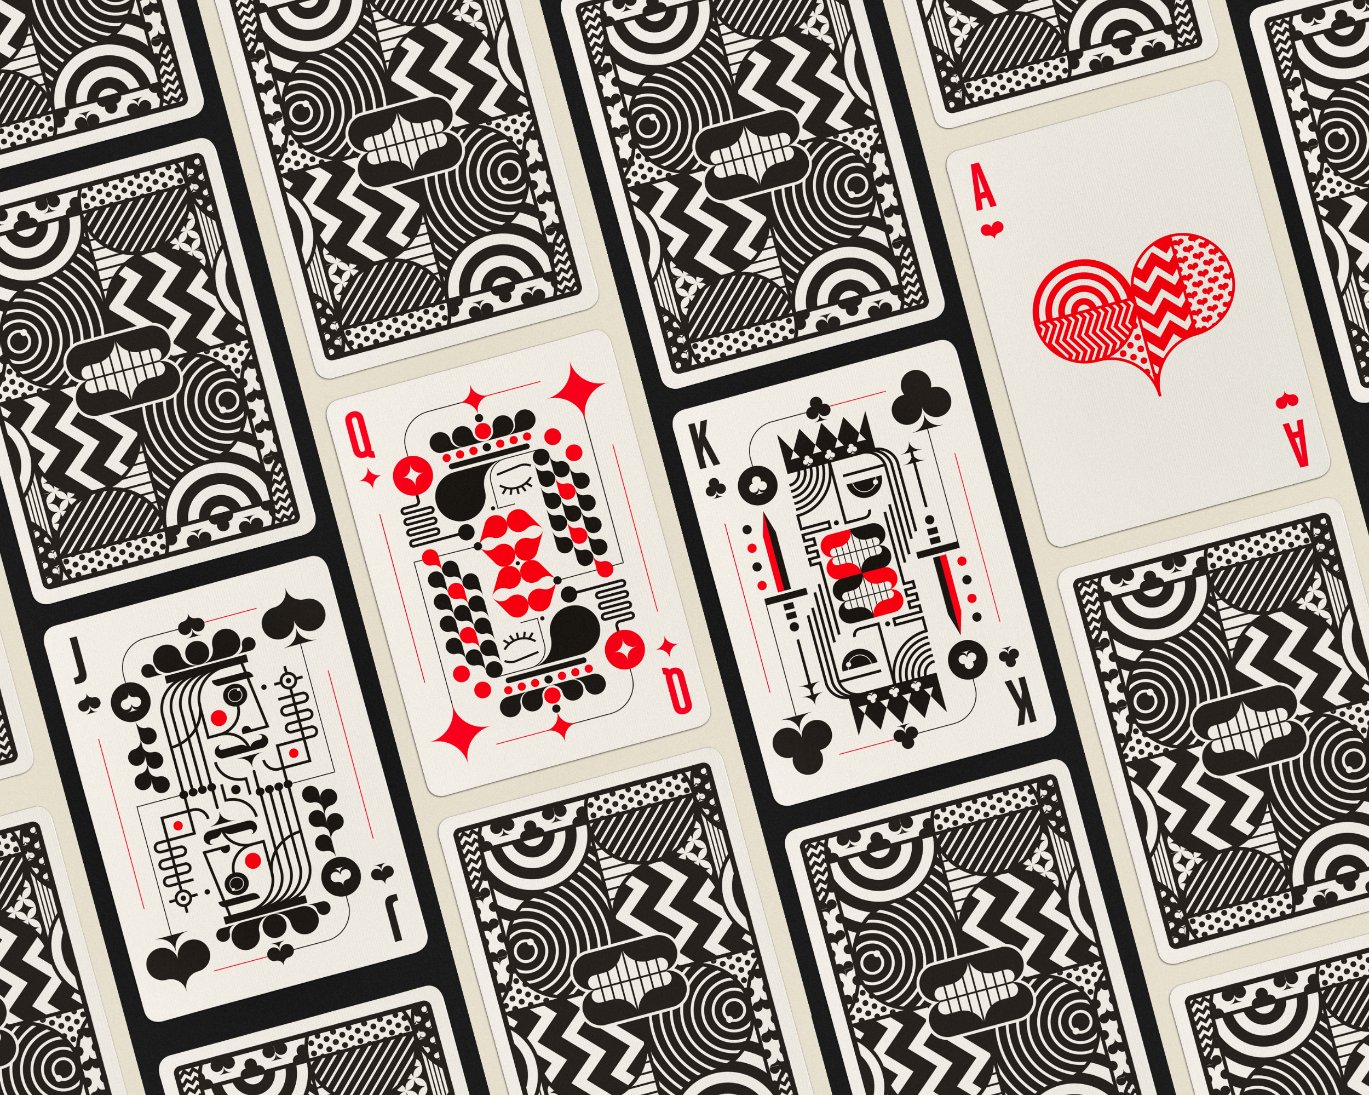 TRÜF Creative And Art Of Play Create A Hypnotic Deck Called Messymod